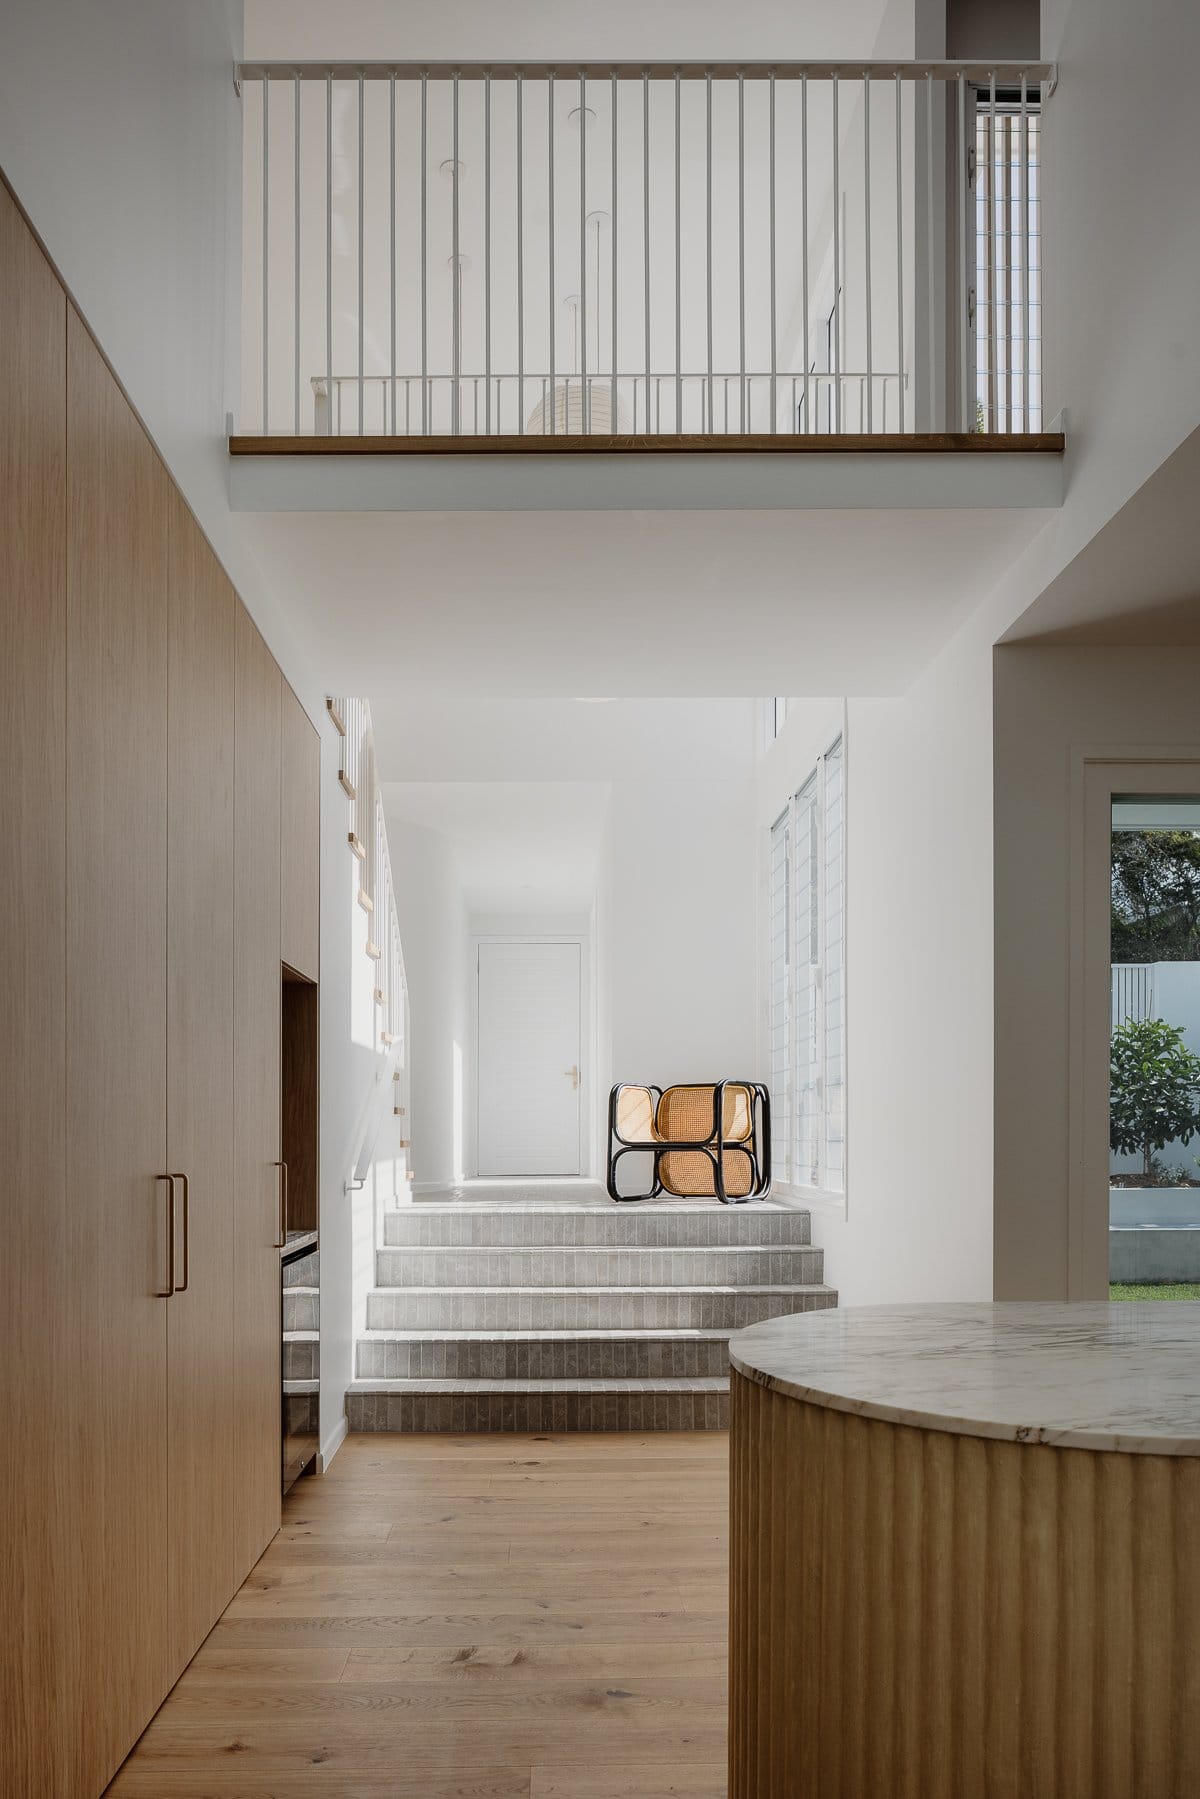 Hazlewood House by Favell Architects. Photography by Andy Macpherson. Tiled steps leading to white hallway and away from kitchen. Timber floors and cabinetry in kitchen in forefront. Black and wicker chair in centre of image. 